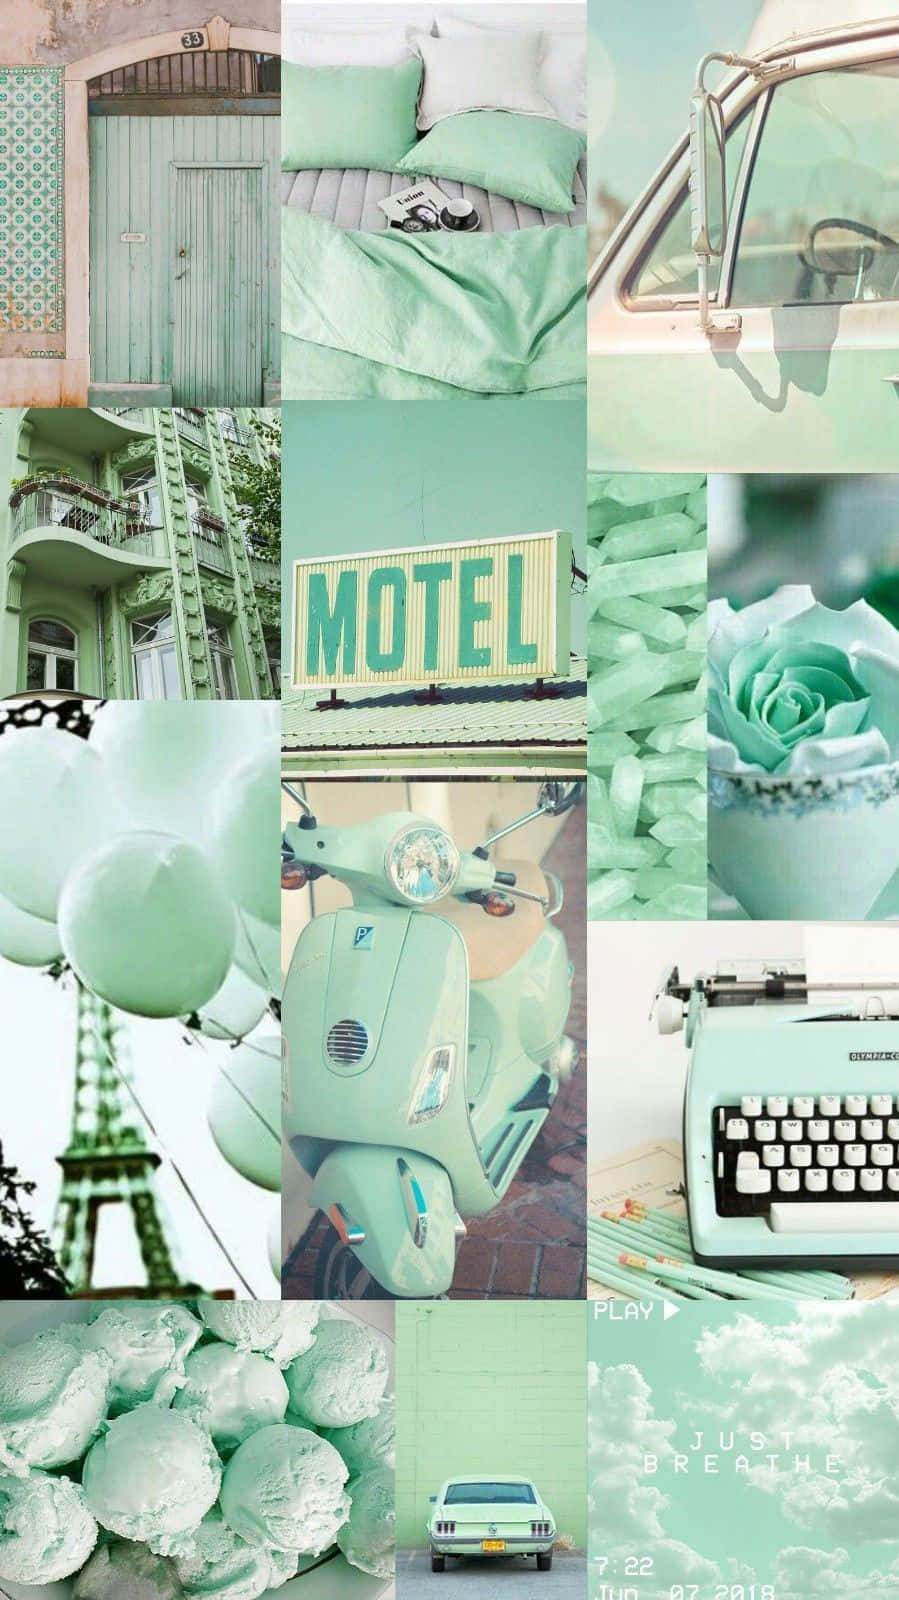 A Collage Of Pictures Of A Motel, Typewriter, And A Typewriter Wallpaper